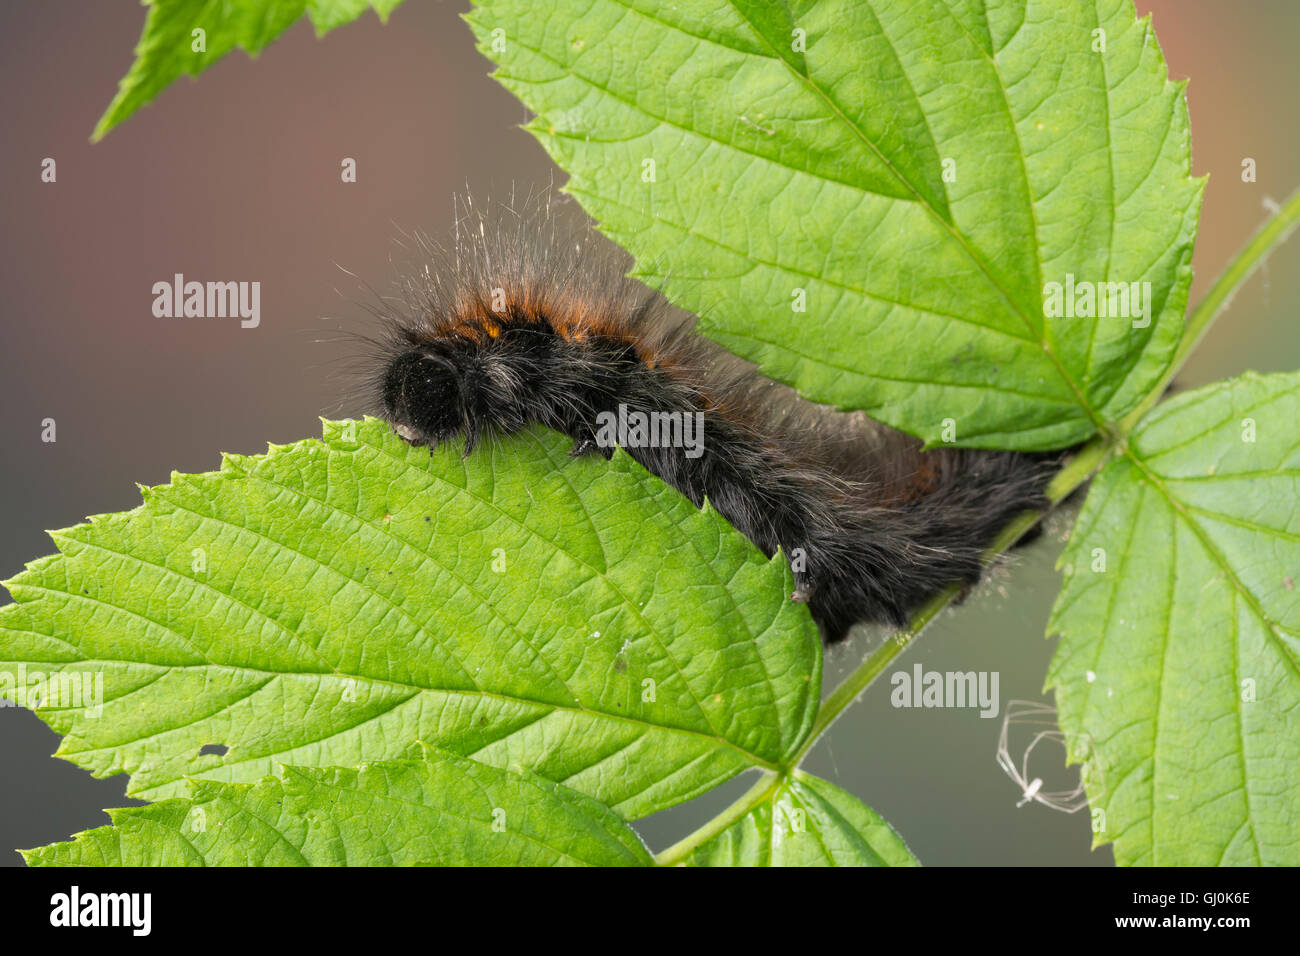 Brombeerspinner, Brombeer-Spinner, Raupe, Macrothylacia Rubi, Fox Moth, Raupe, Le Bombyx De La Ronce, Chenille, Glucken, L Stockfoto